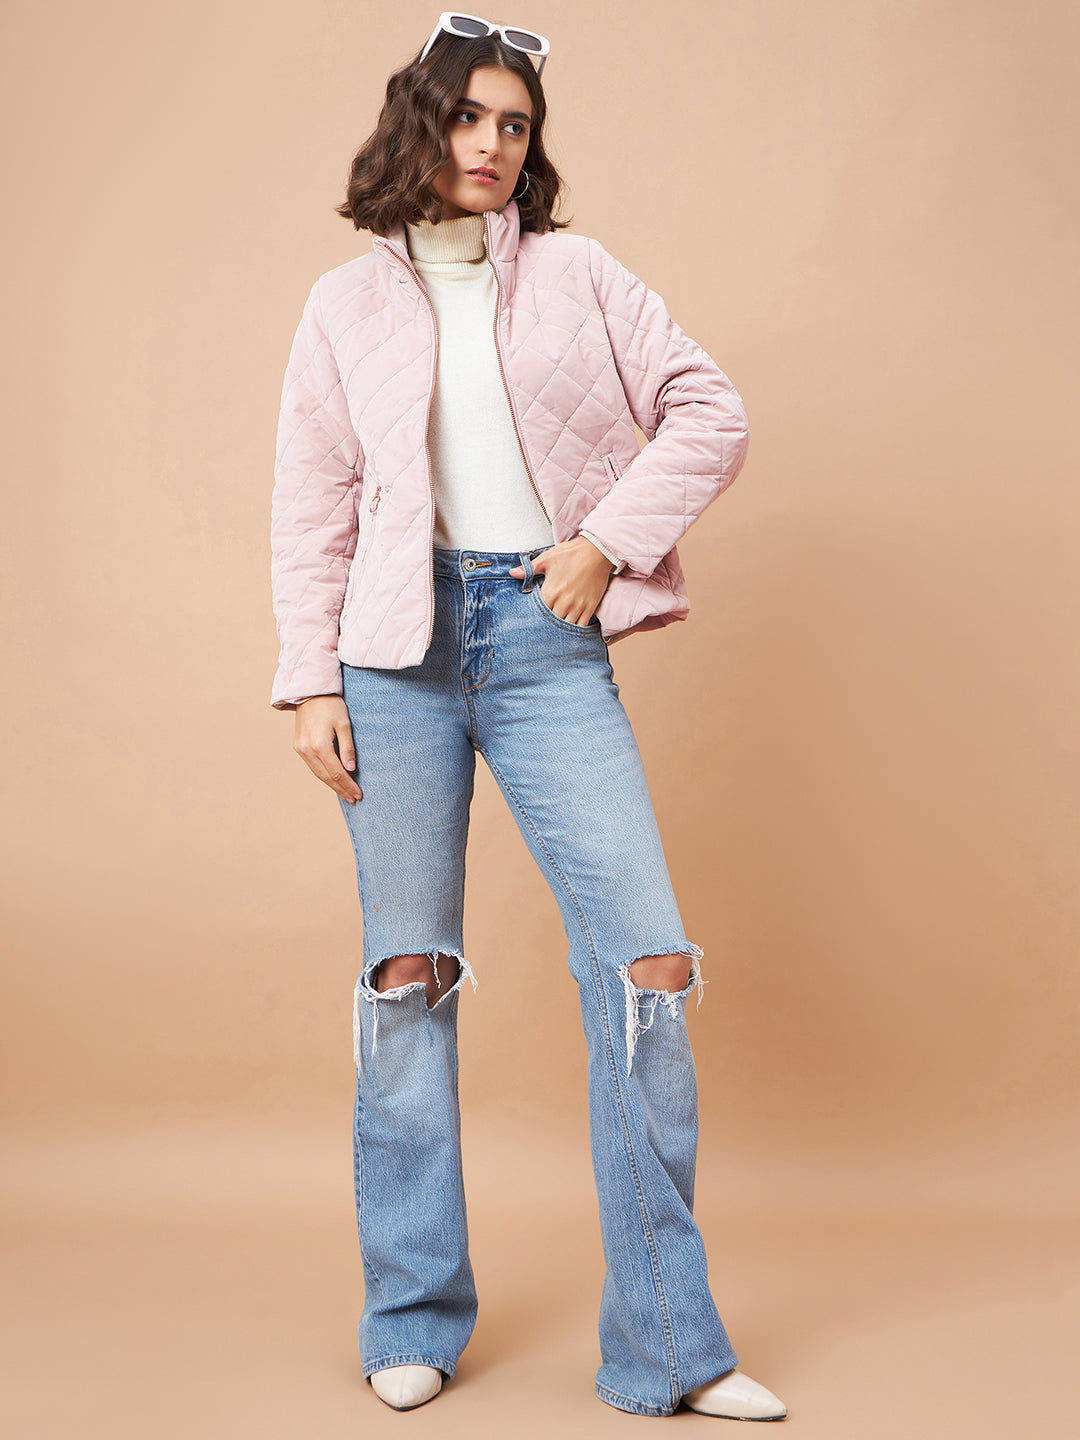 Gipsy Women Stand Collar Straight Full Sleeve Polyester Fabric Pink Jackets